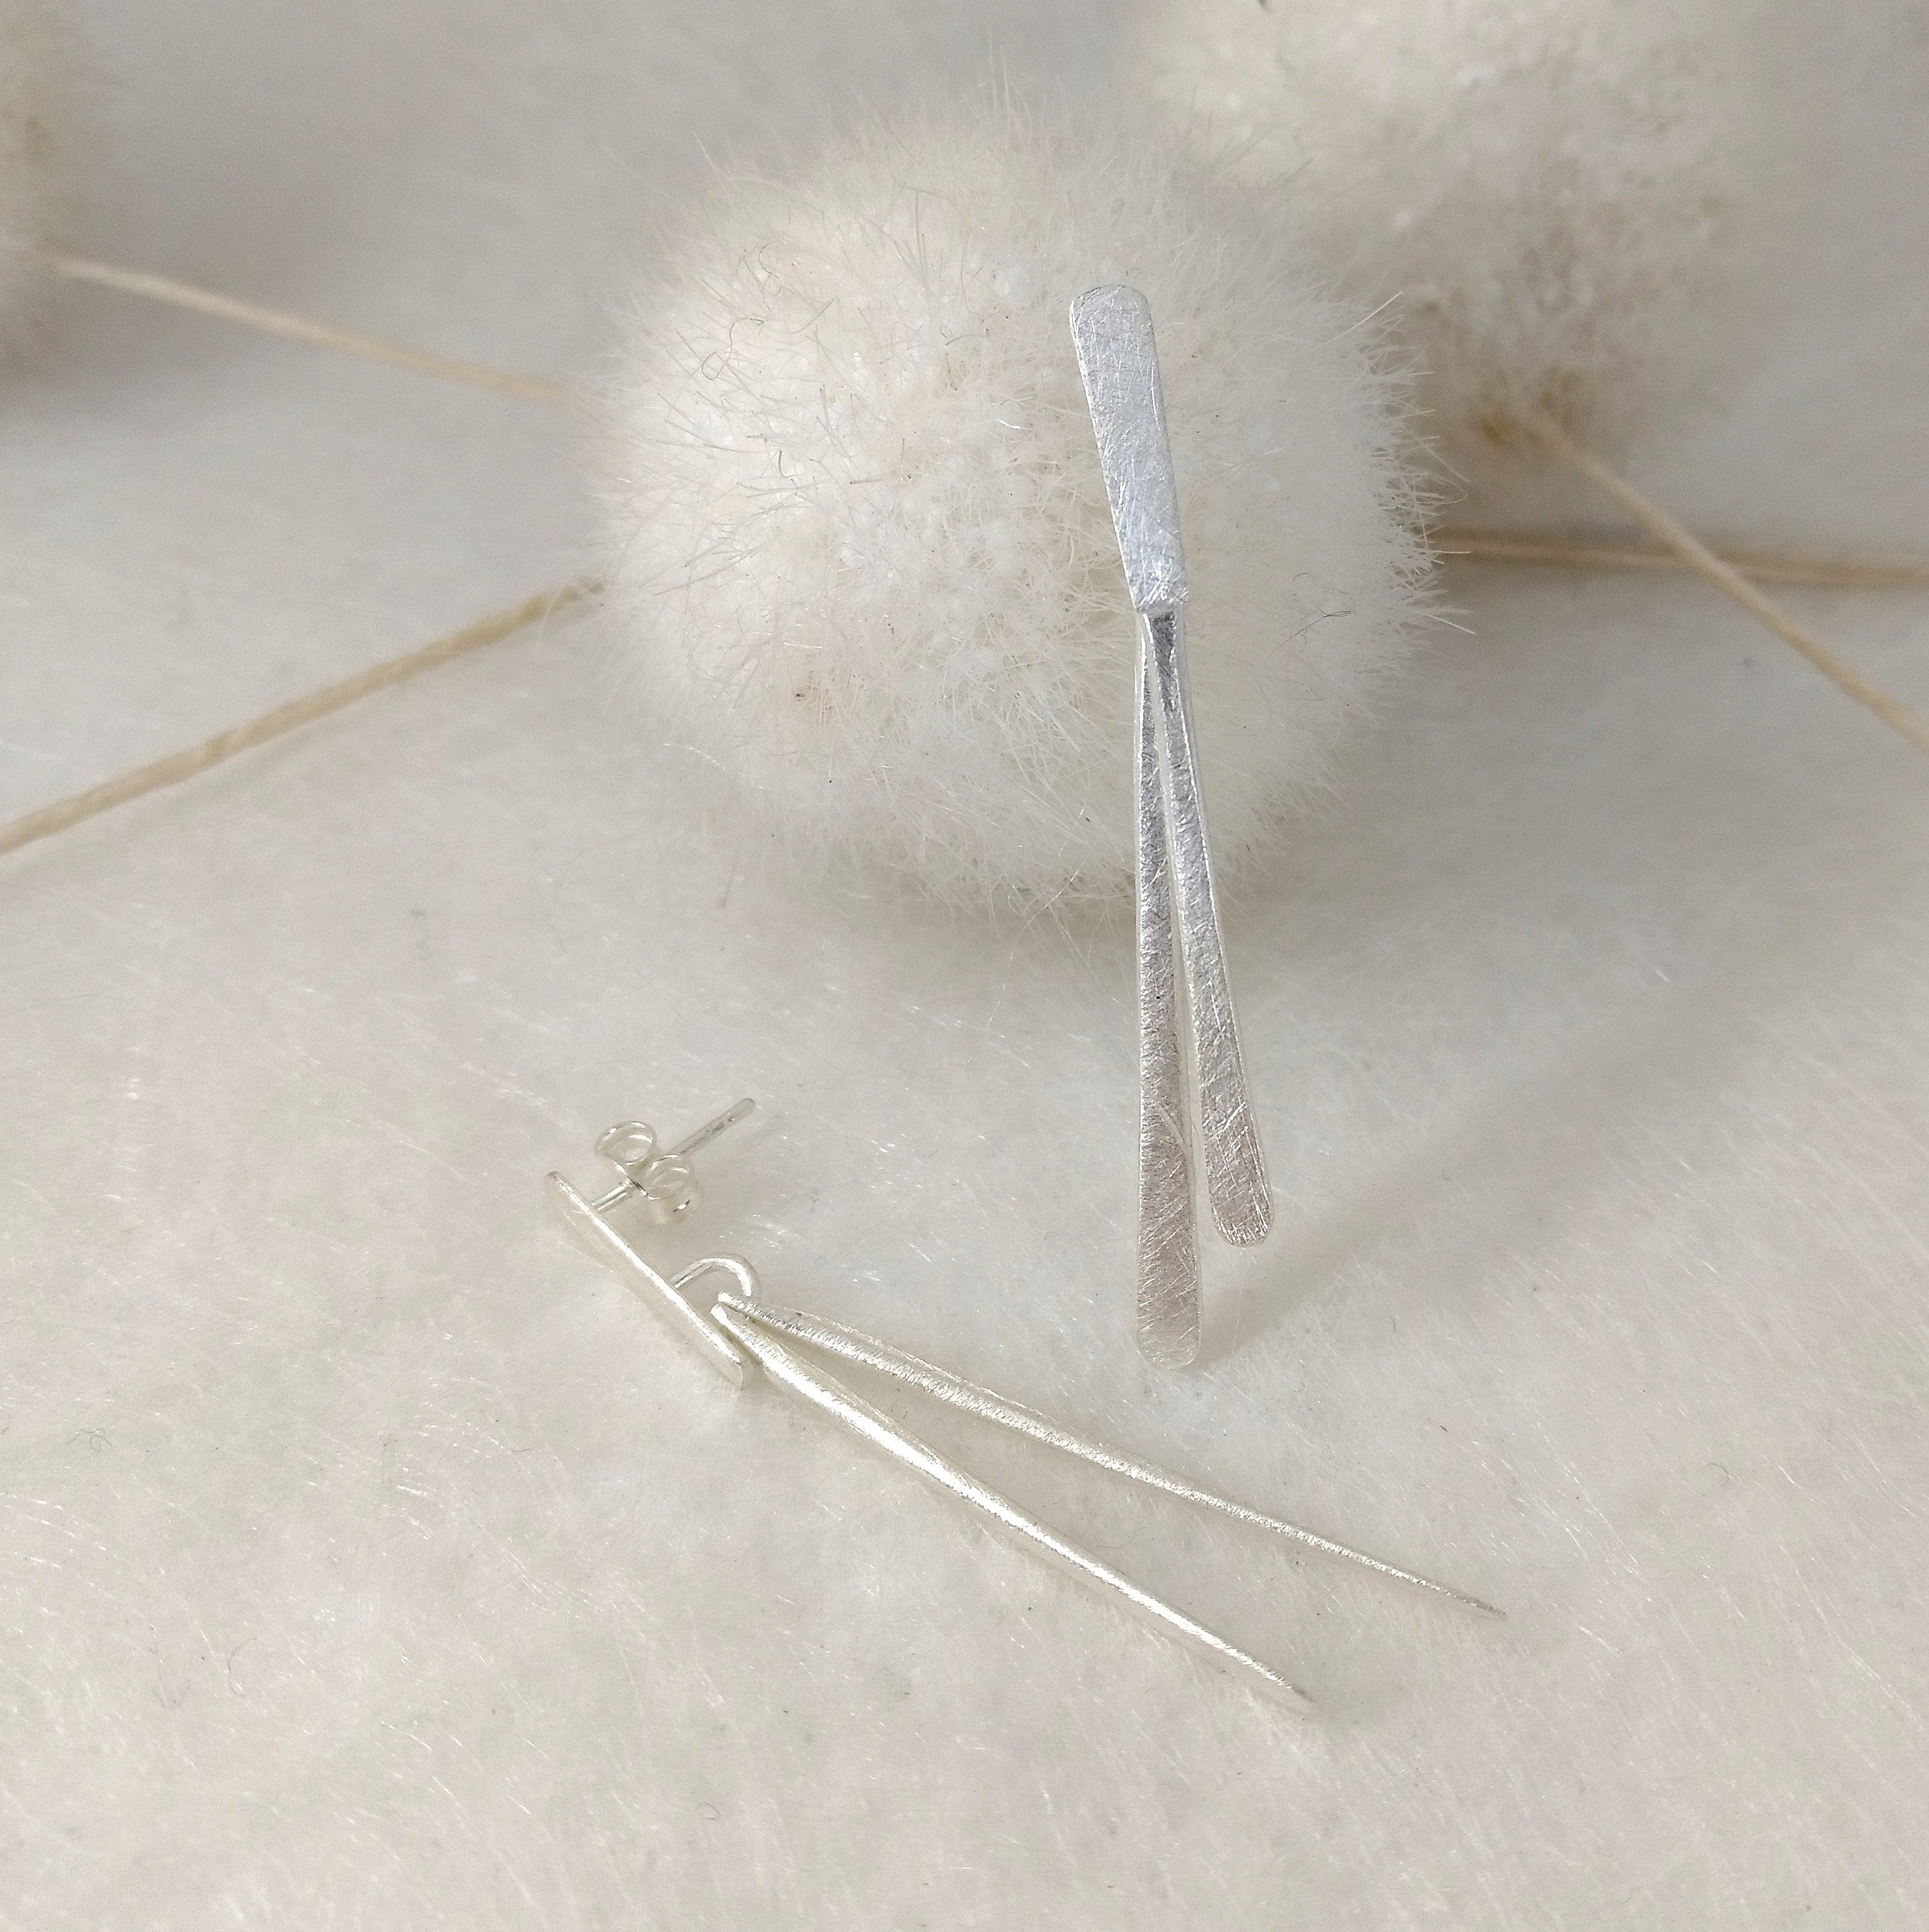 UbaL - Fine and elegant earrings in silver or gold plated silver (5.5cm long)